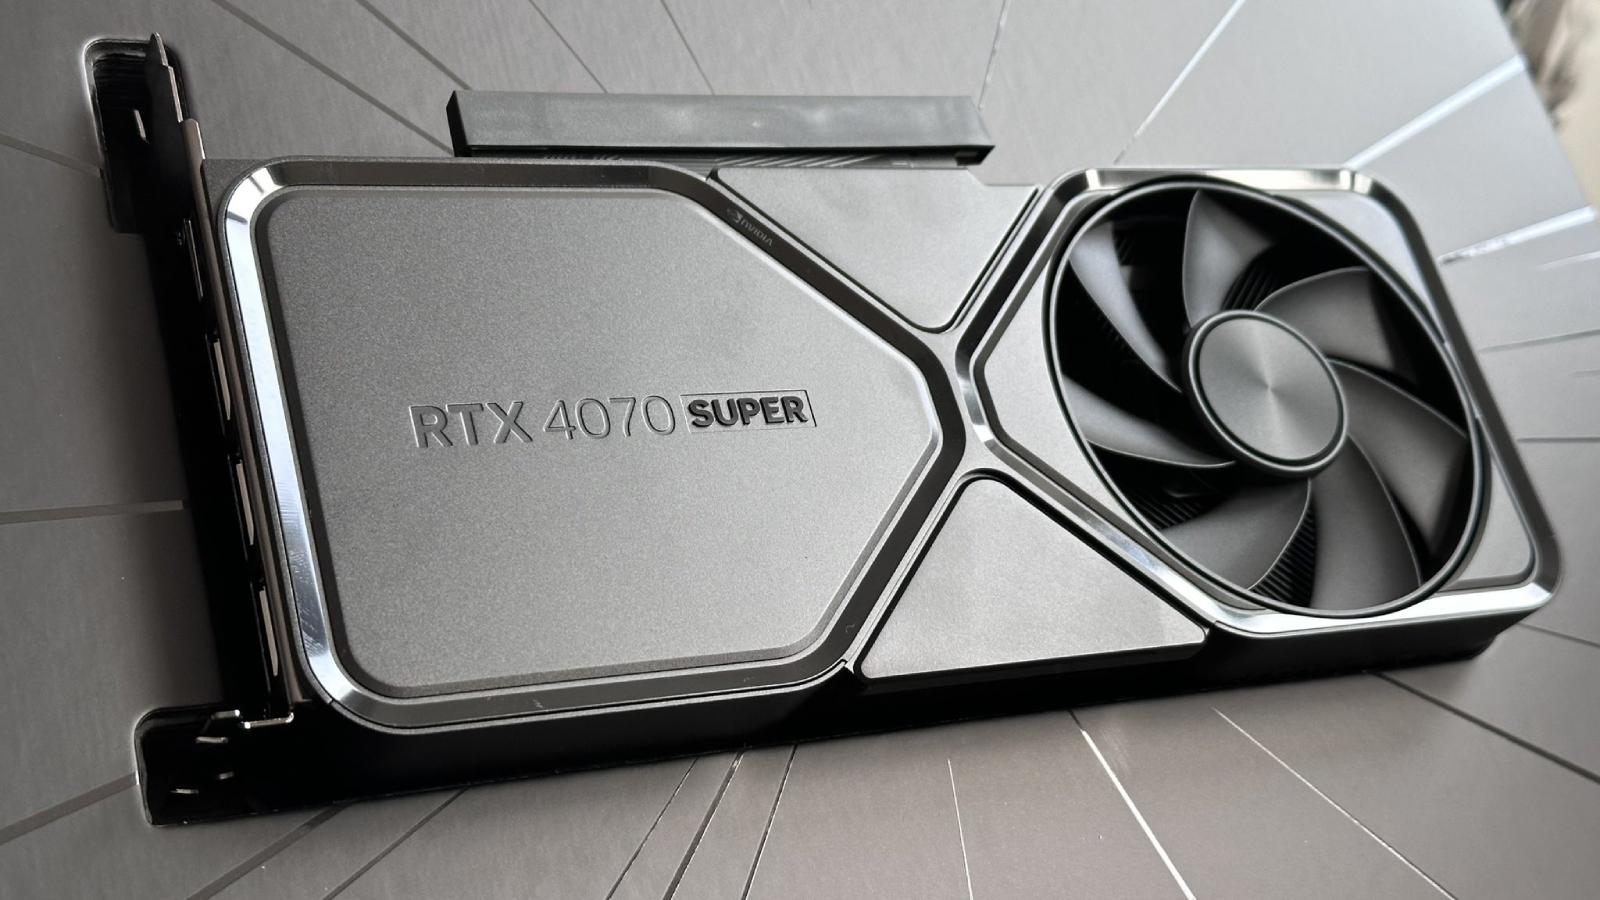 Nvidia GeForce RTX 4070 Super Founders Edition review: A true